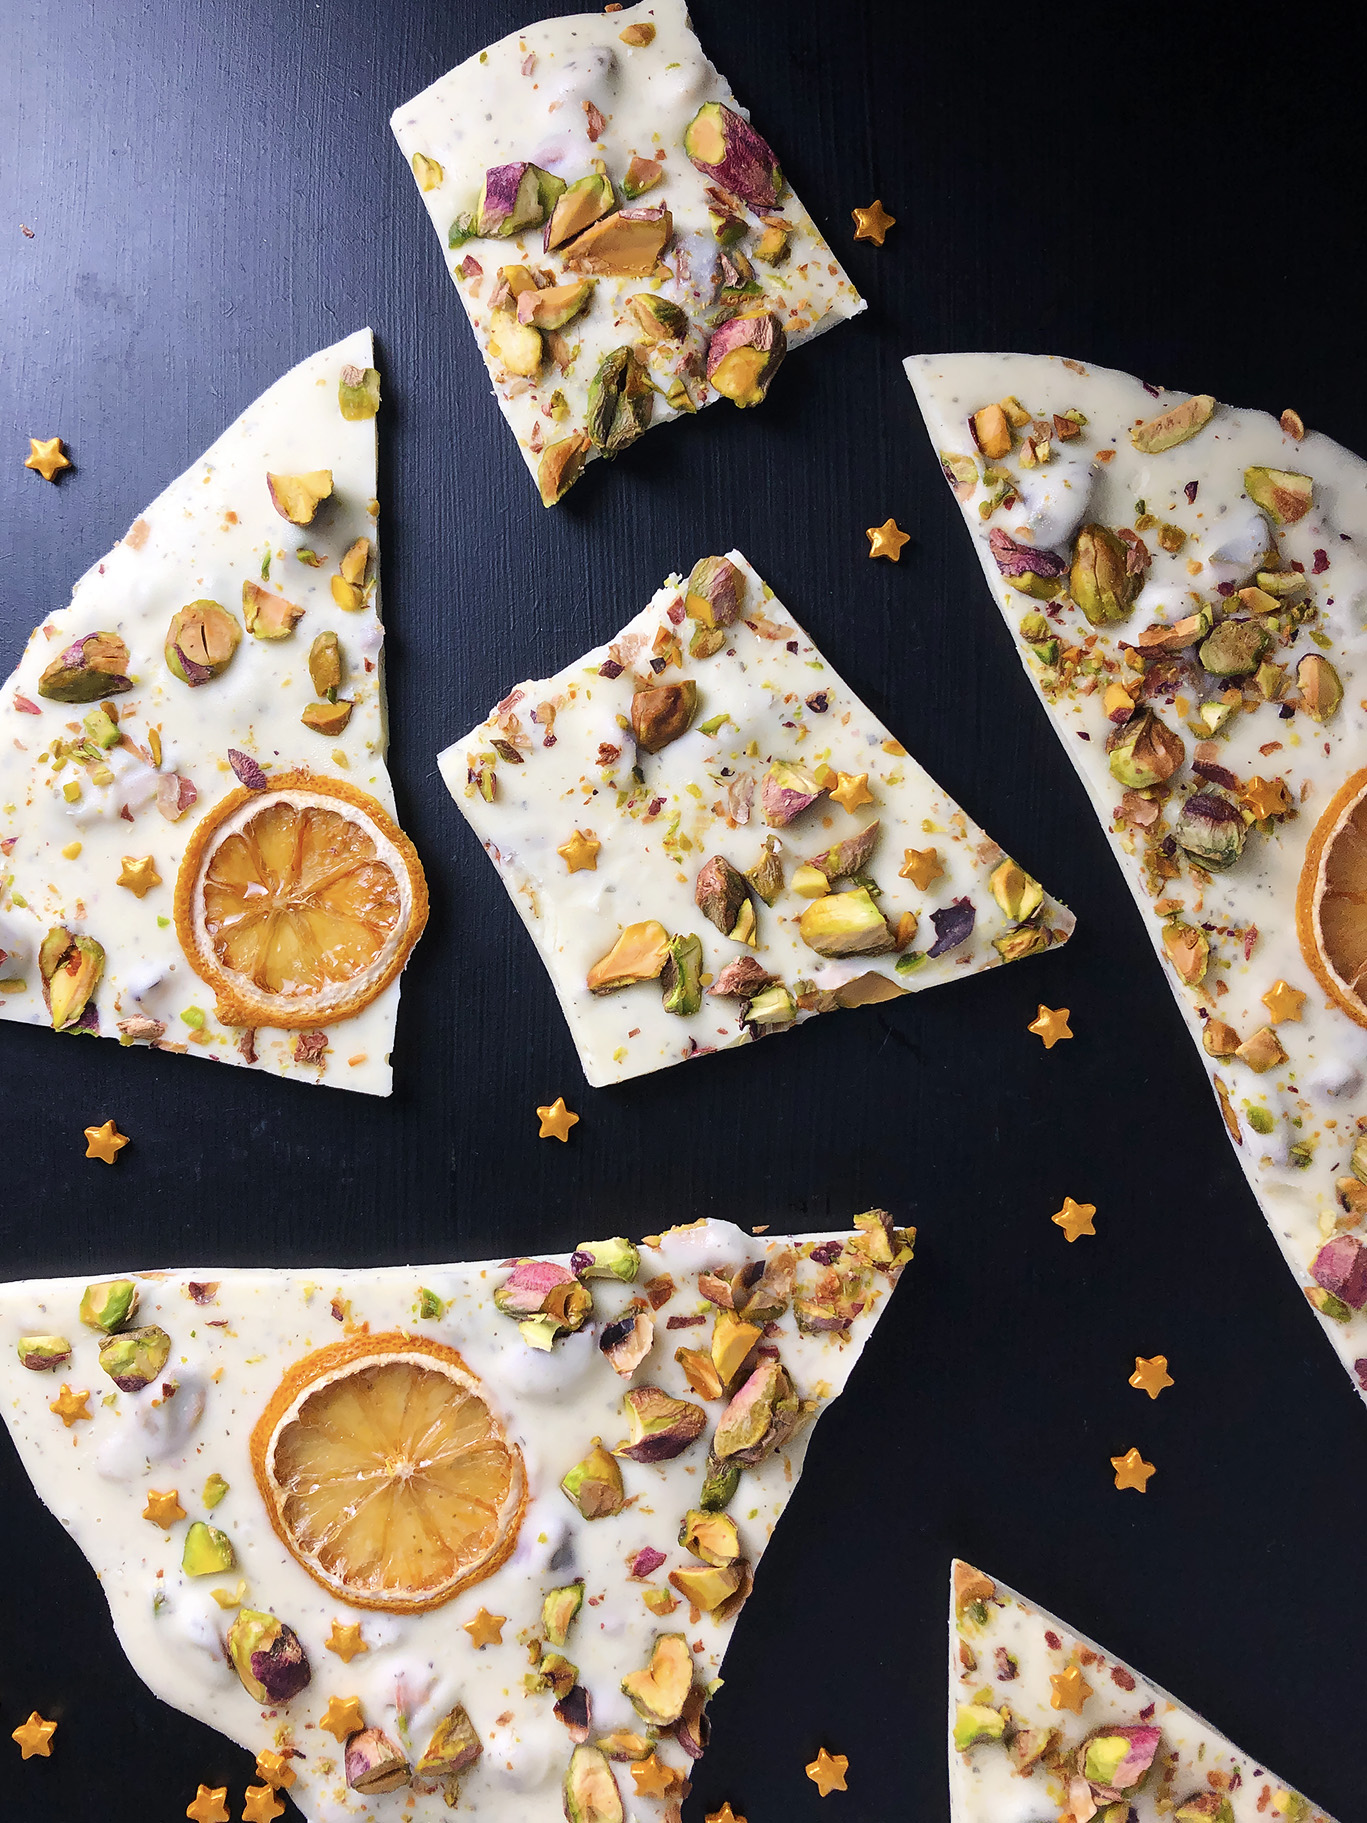 Top-down shot of white chocolate bark with lemon, green tea, pistachios and oven-dried lemons, against a black background, sprinkled with gold candy stars.